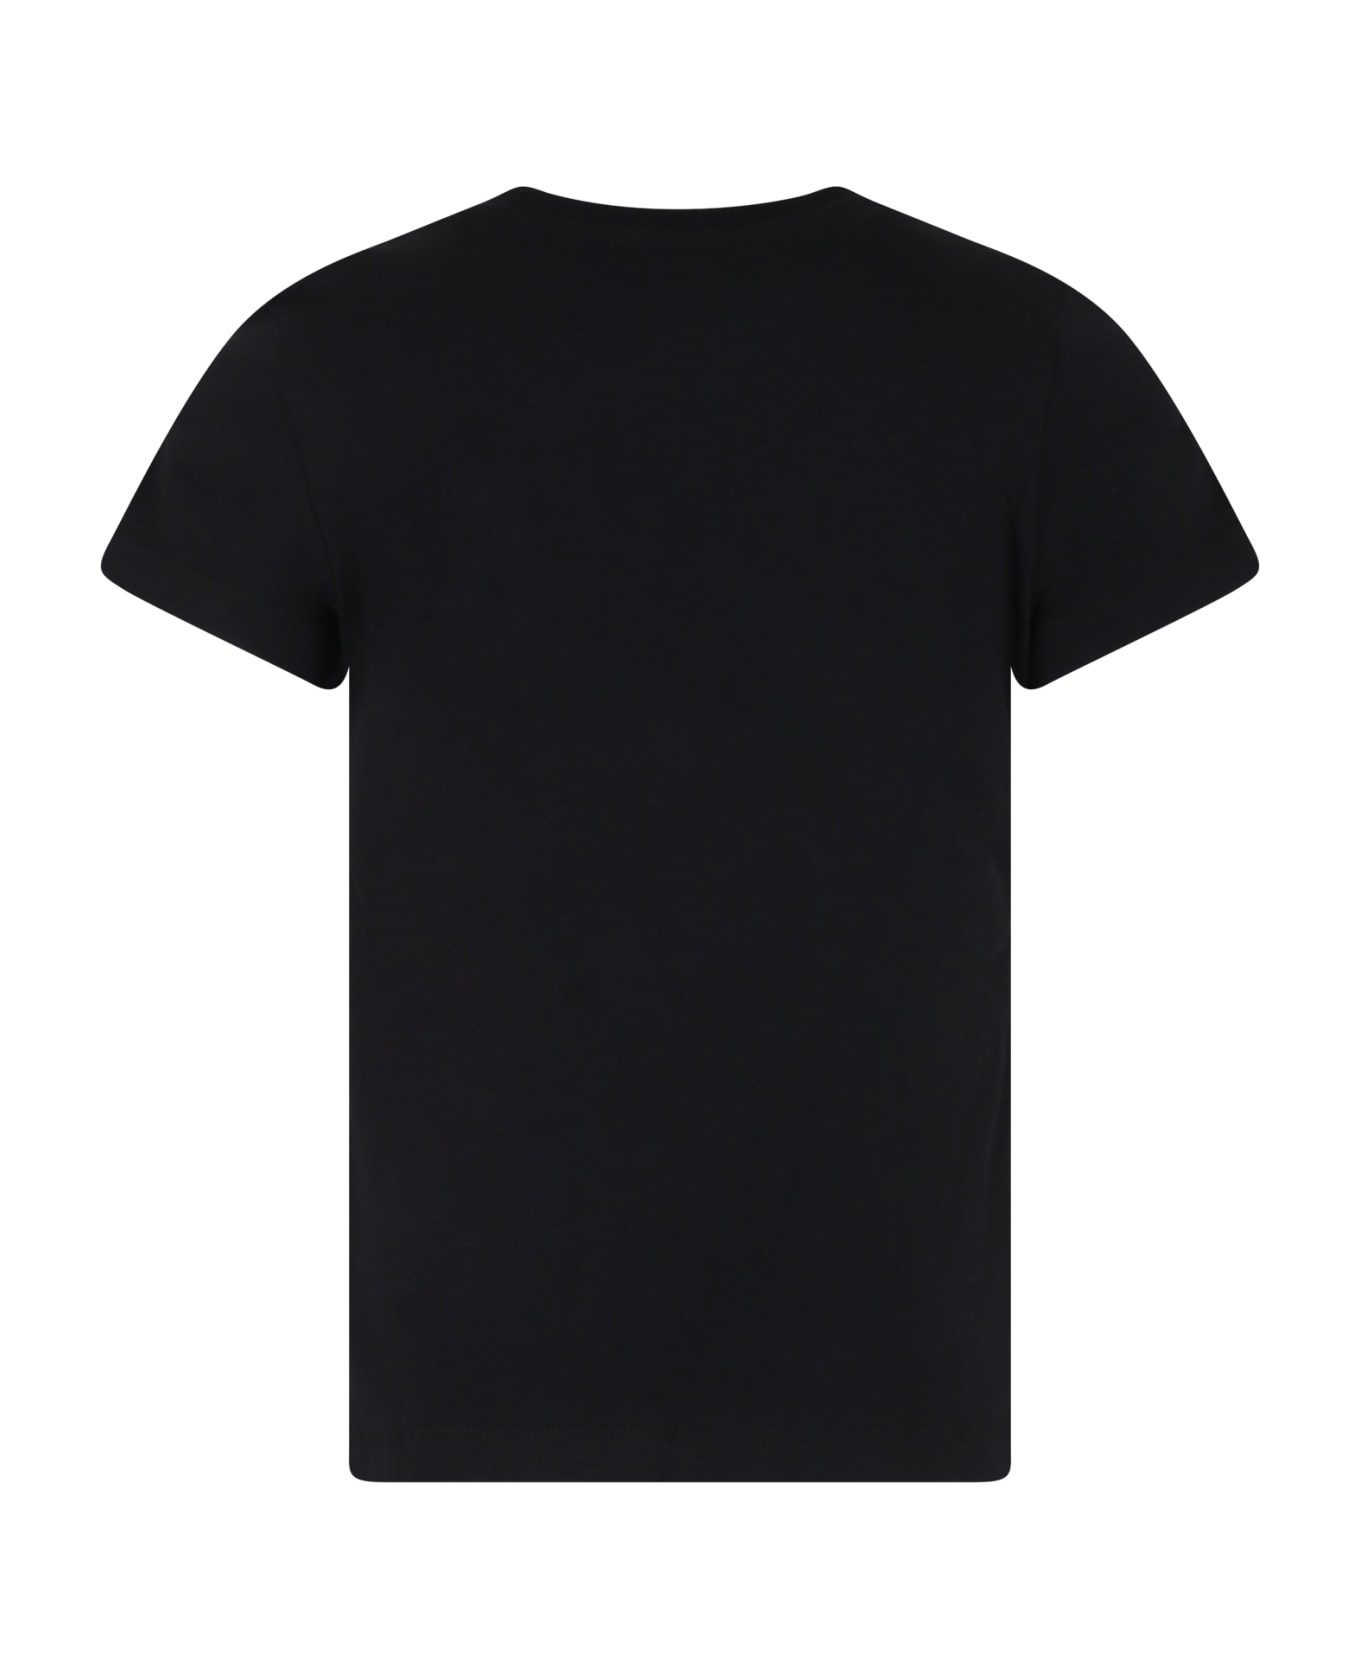 Moschino Black T-shirt For Kids With Logo - Black